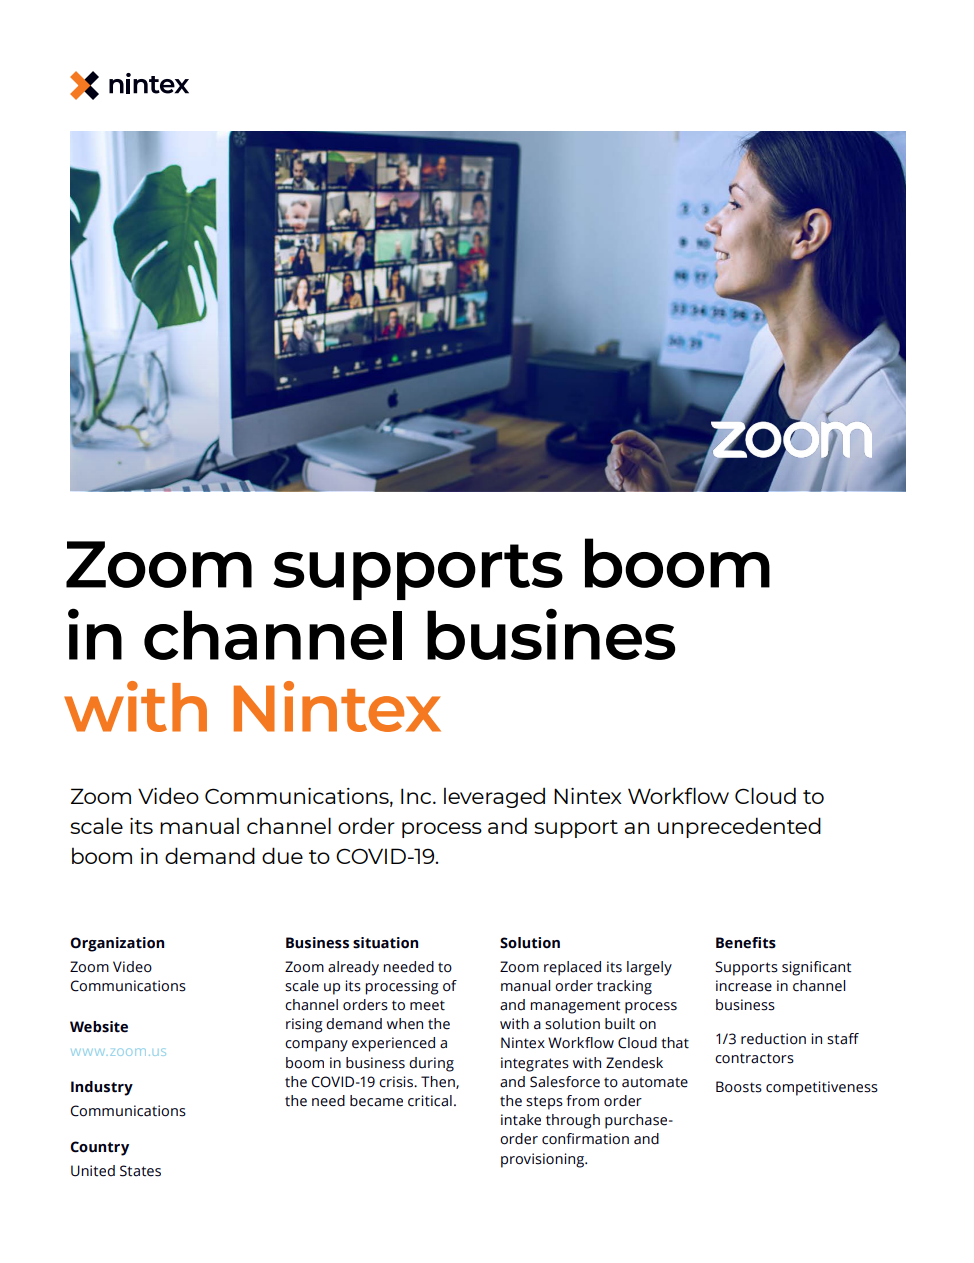 Nintex Case Study Cover Page